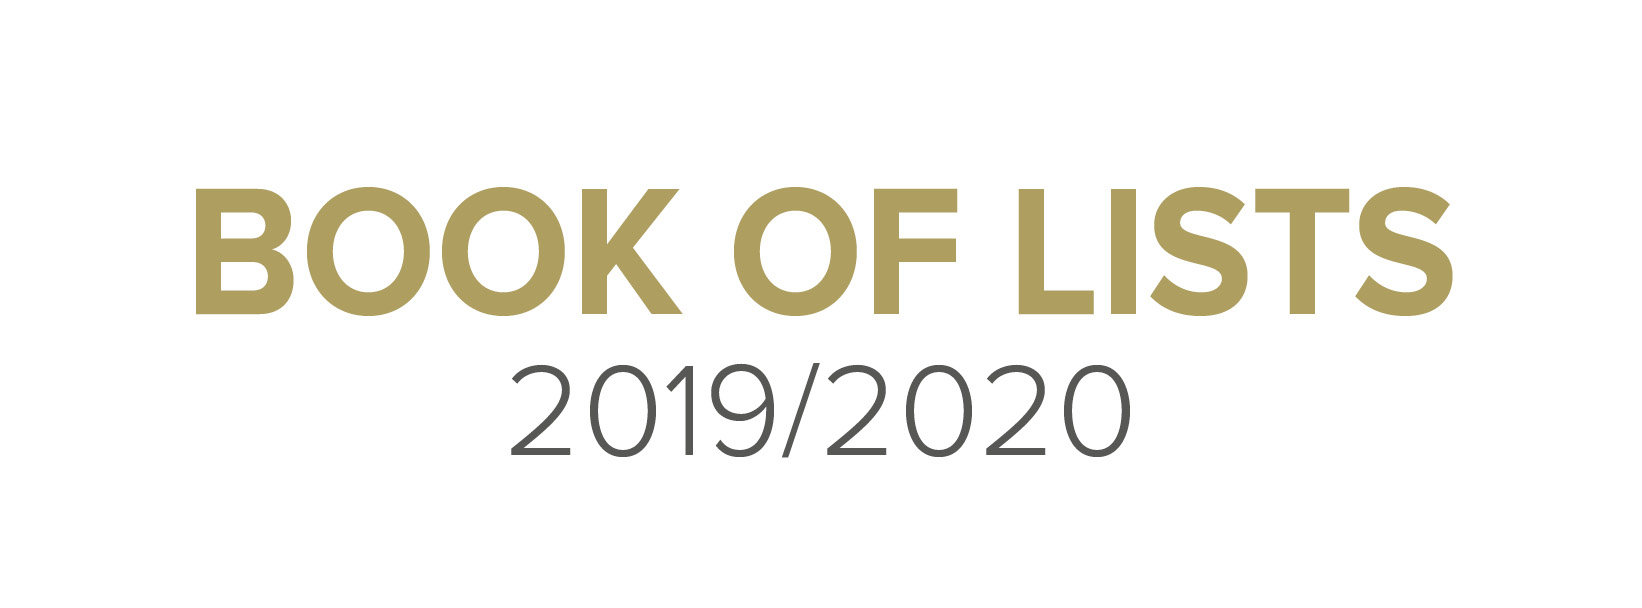 Book of Lists 2019/2020